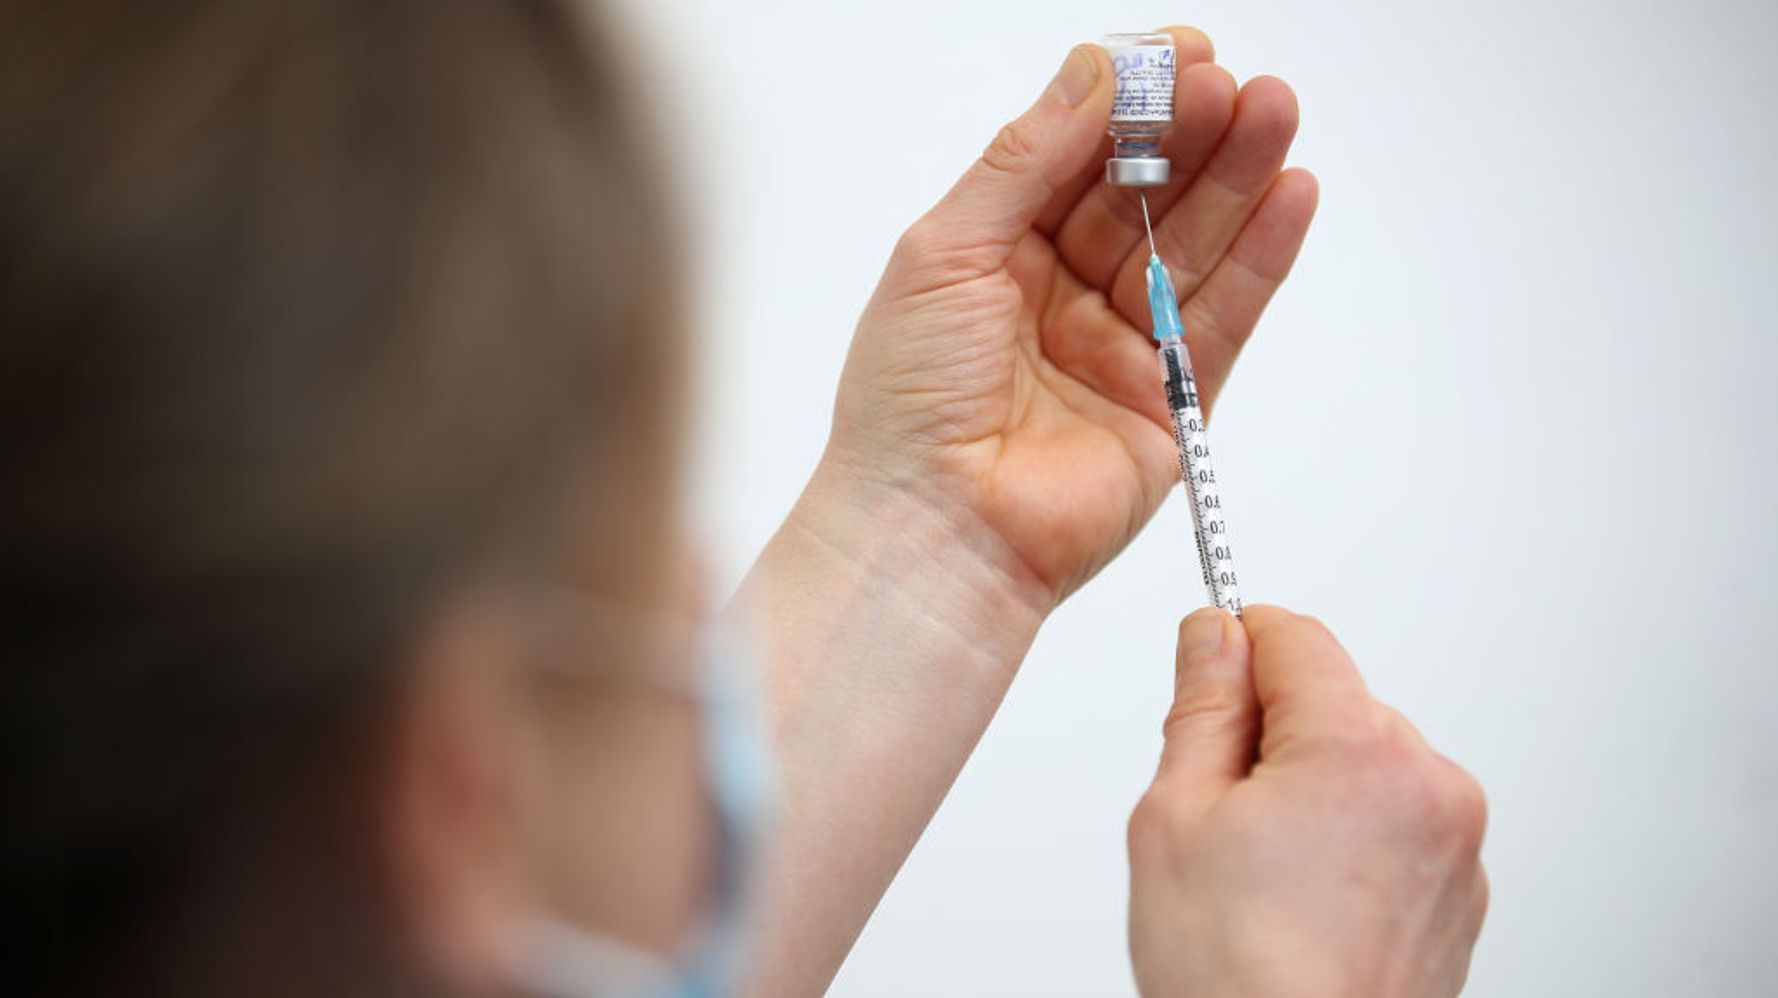 Pfizer COVID-19 vaccine reduces transmission after 1 dose, study findings